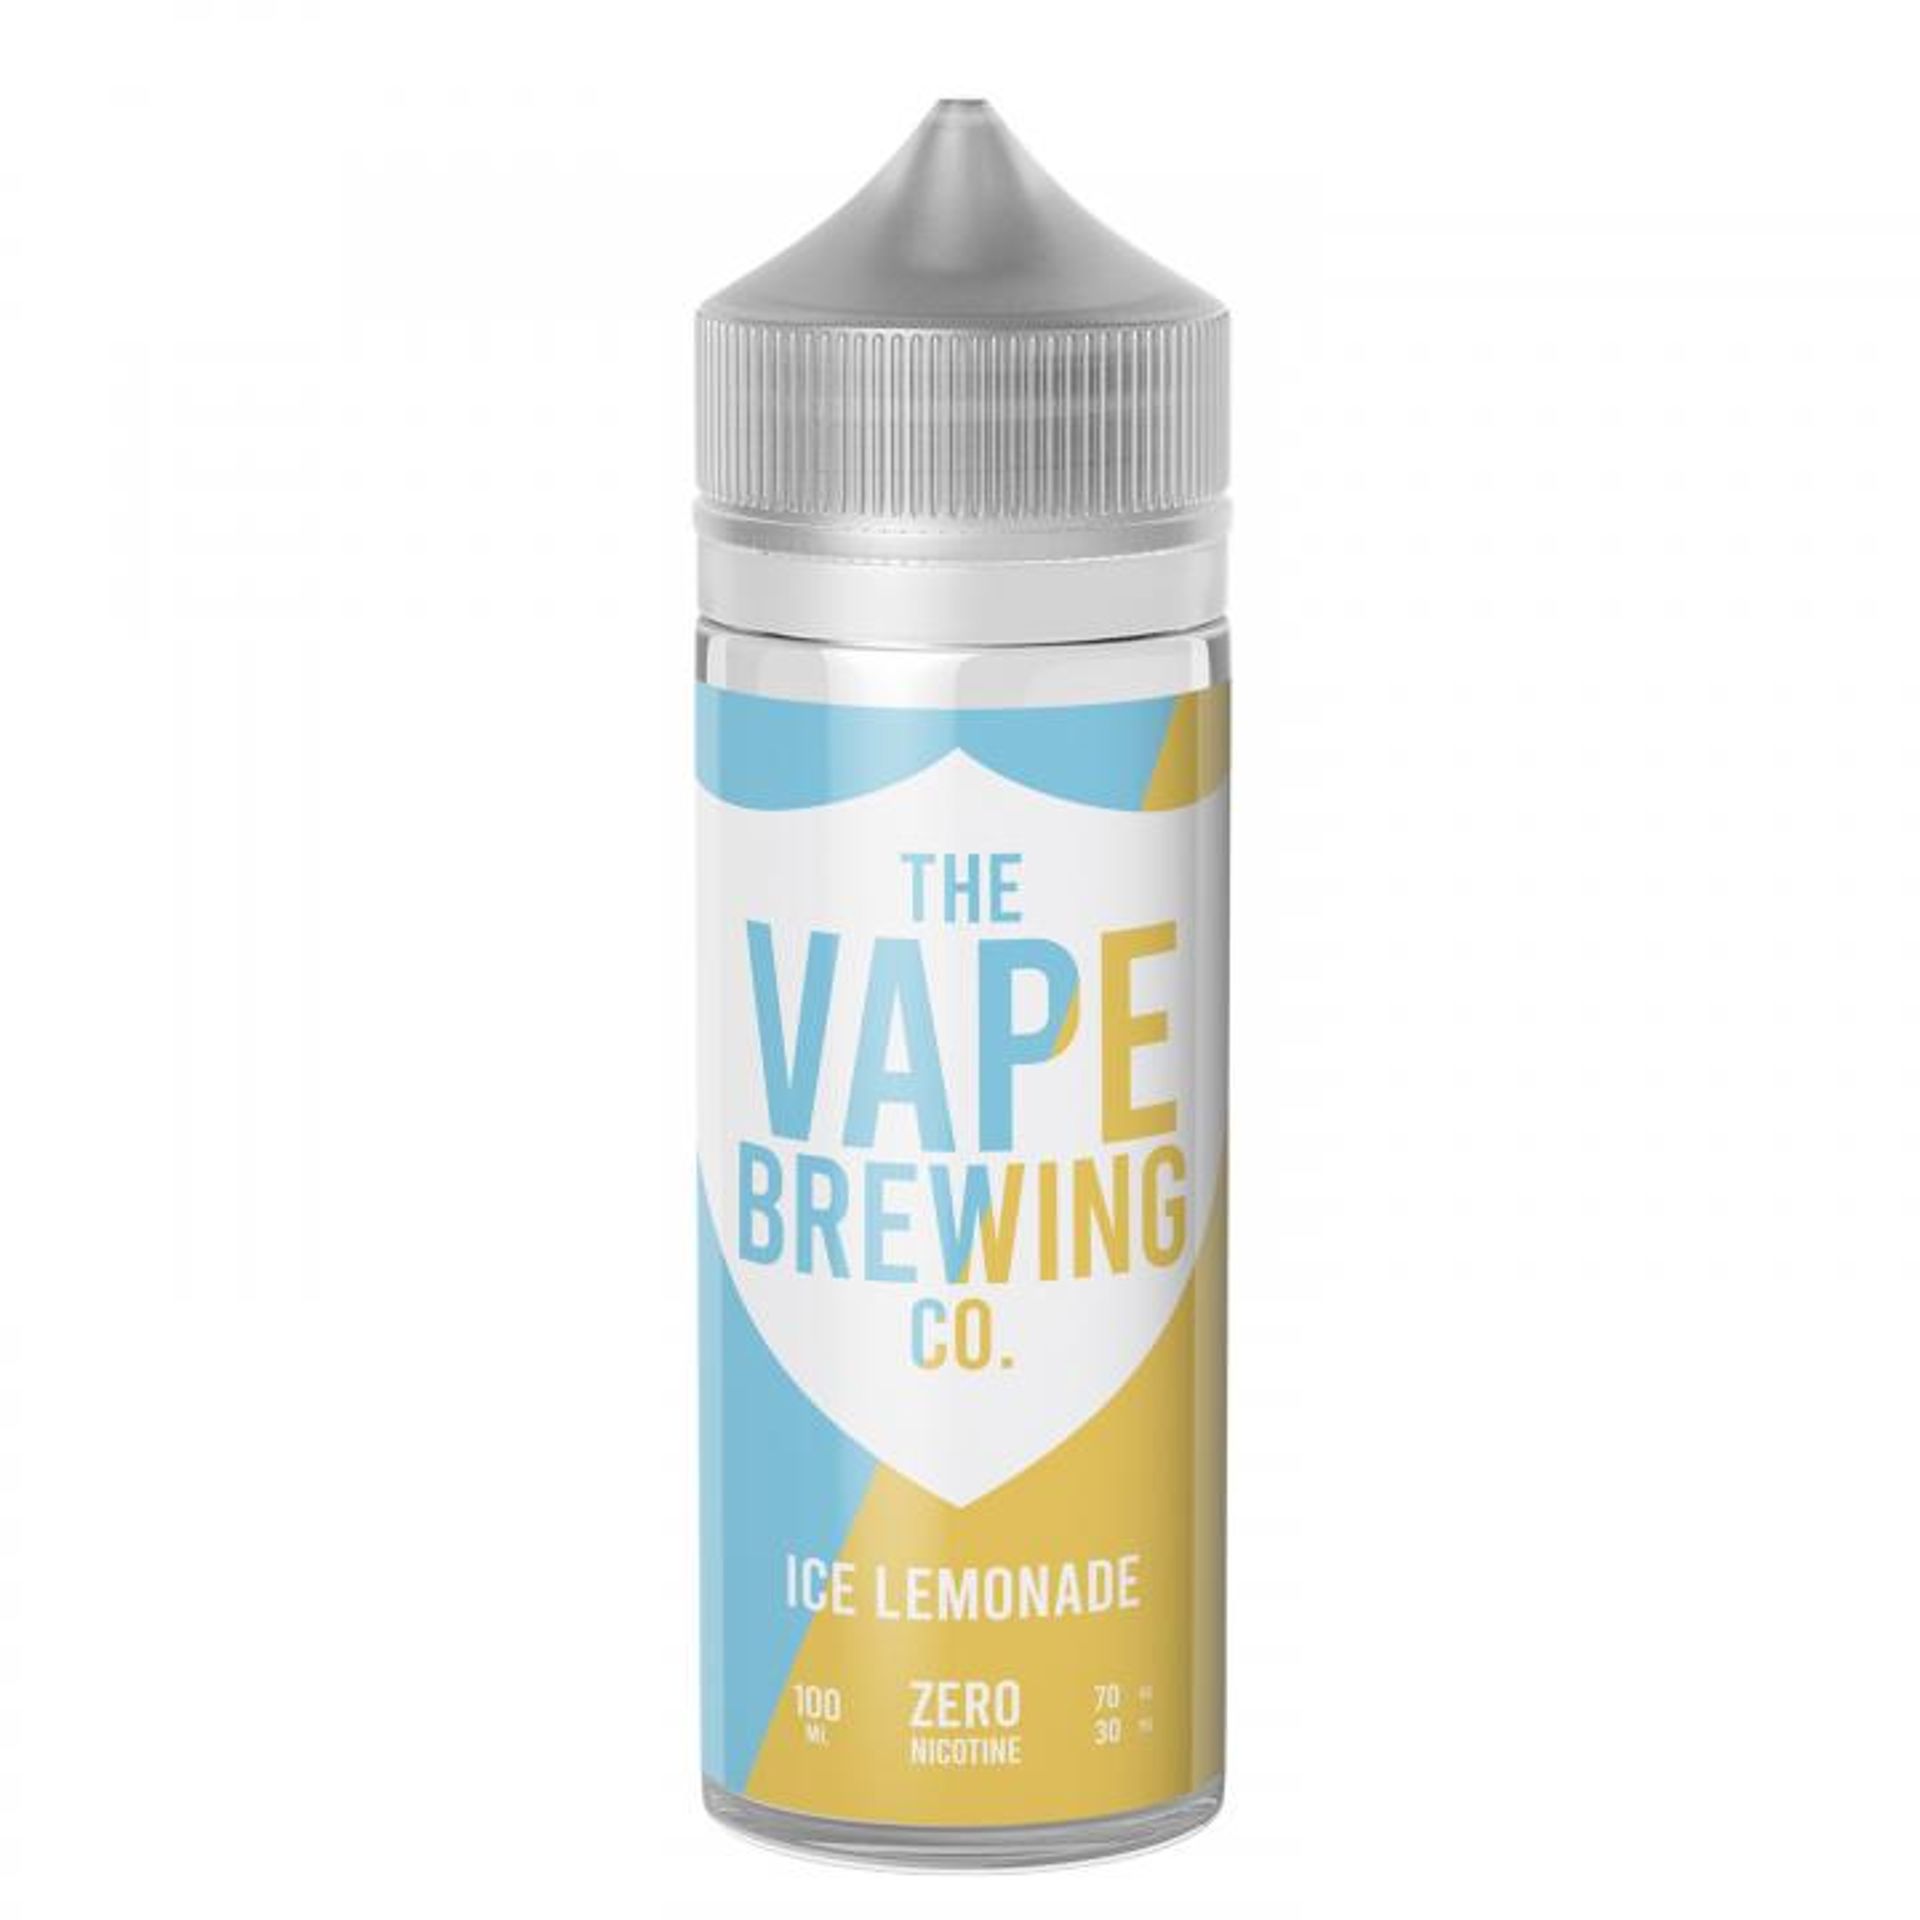 Image of Ice Lemonade by The Vape Brewing Co